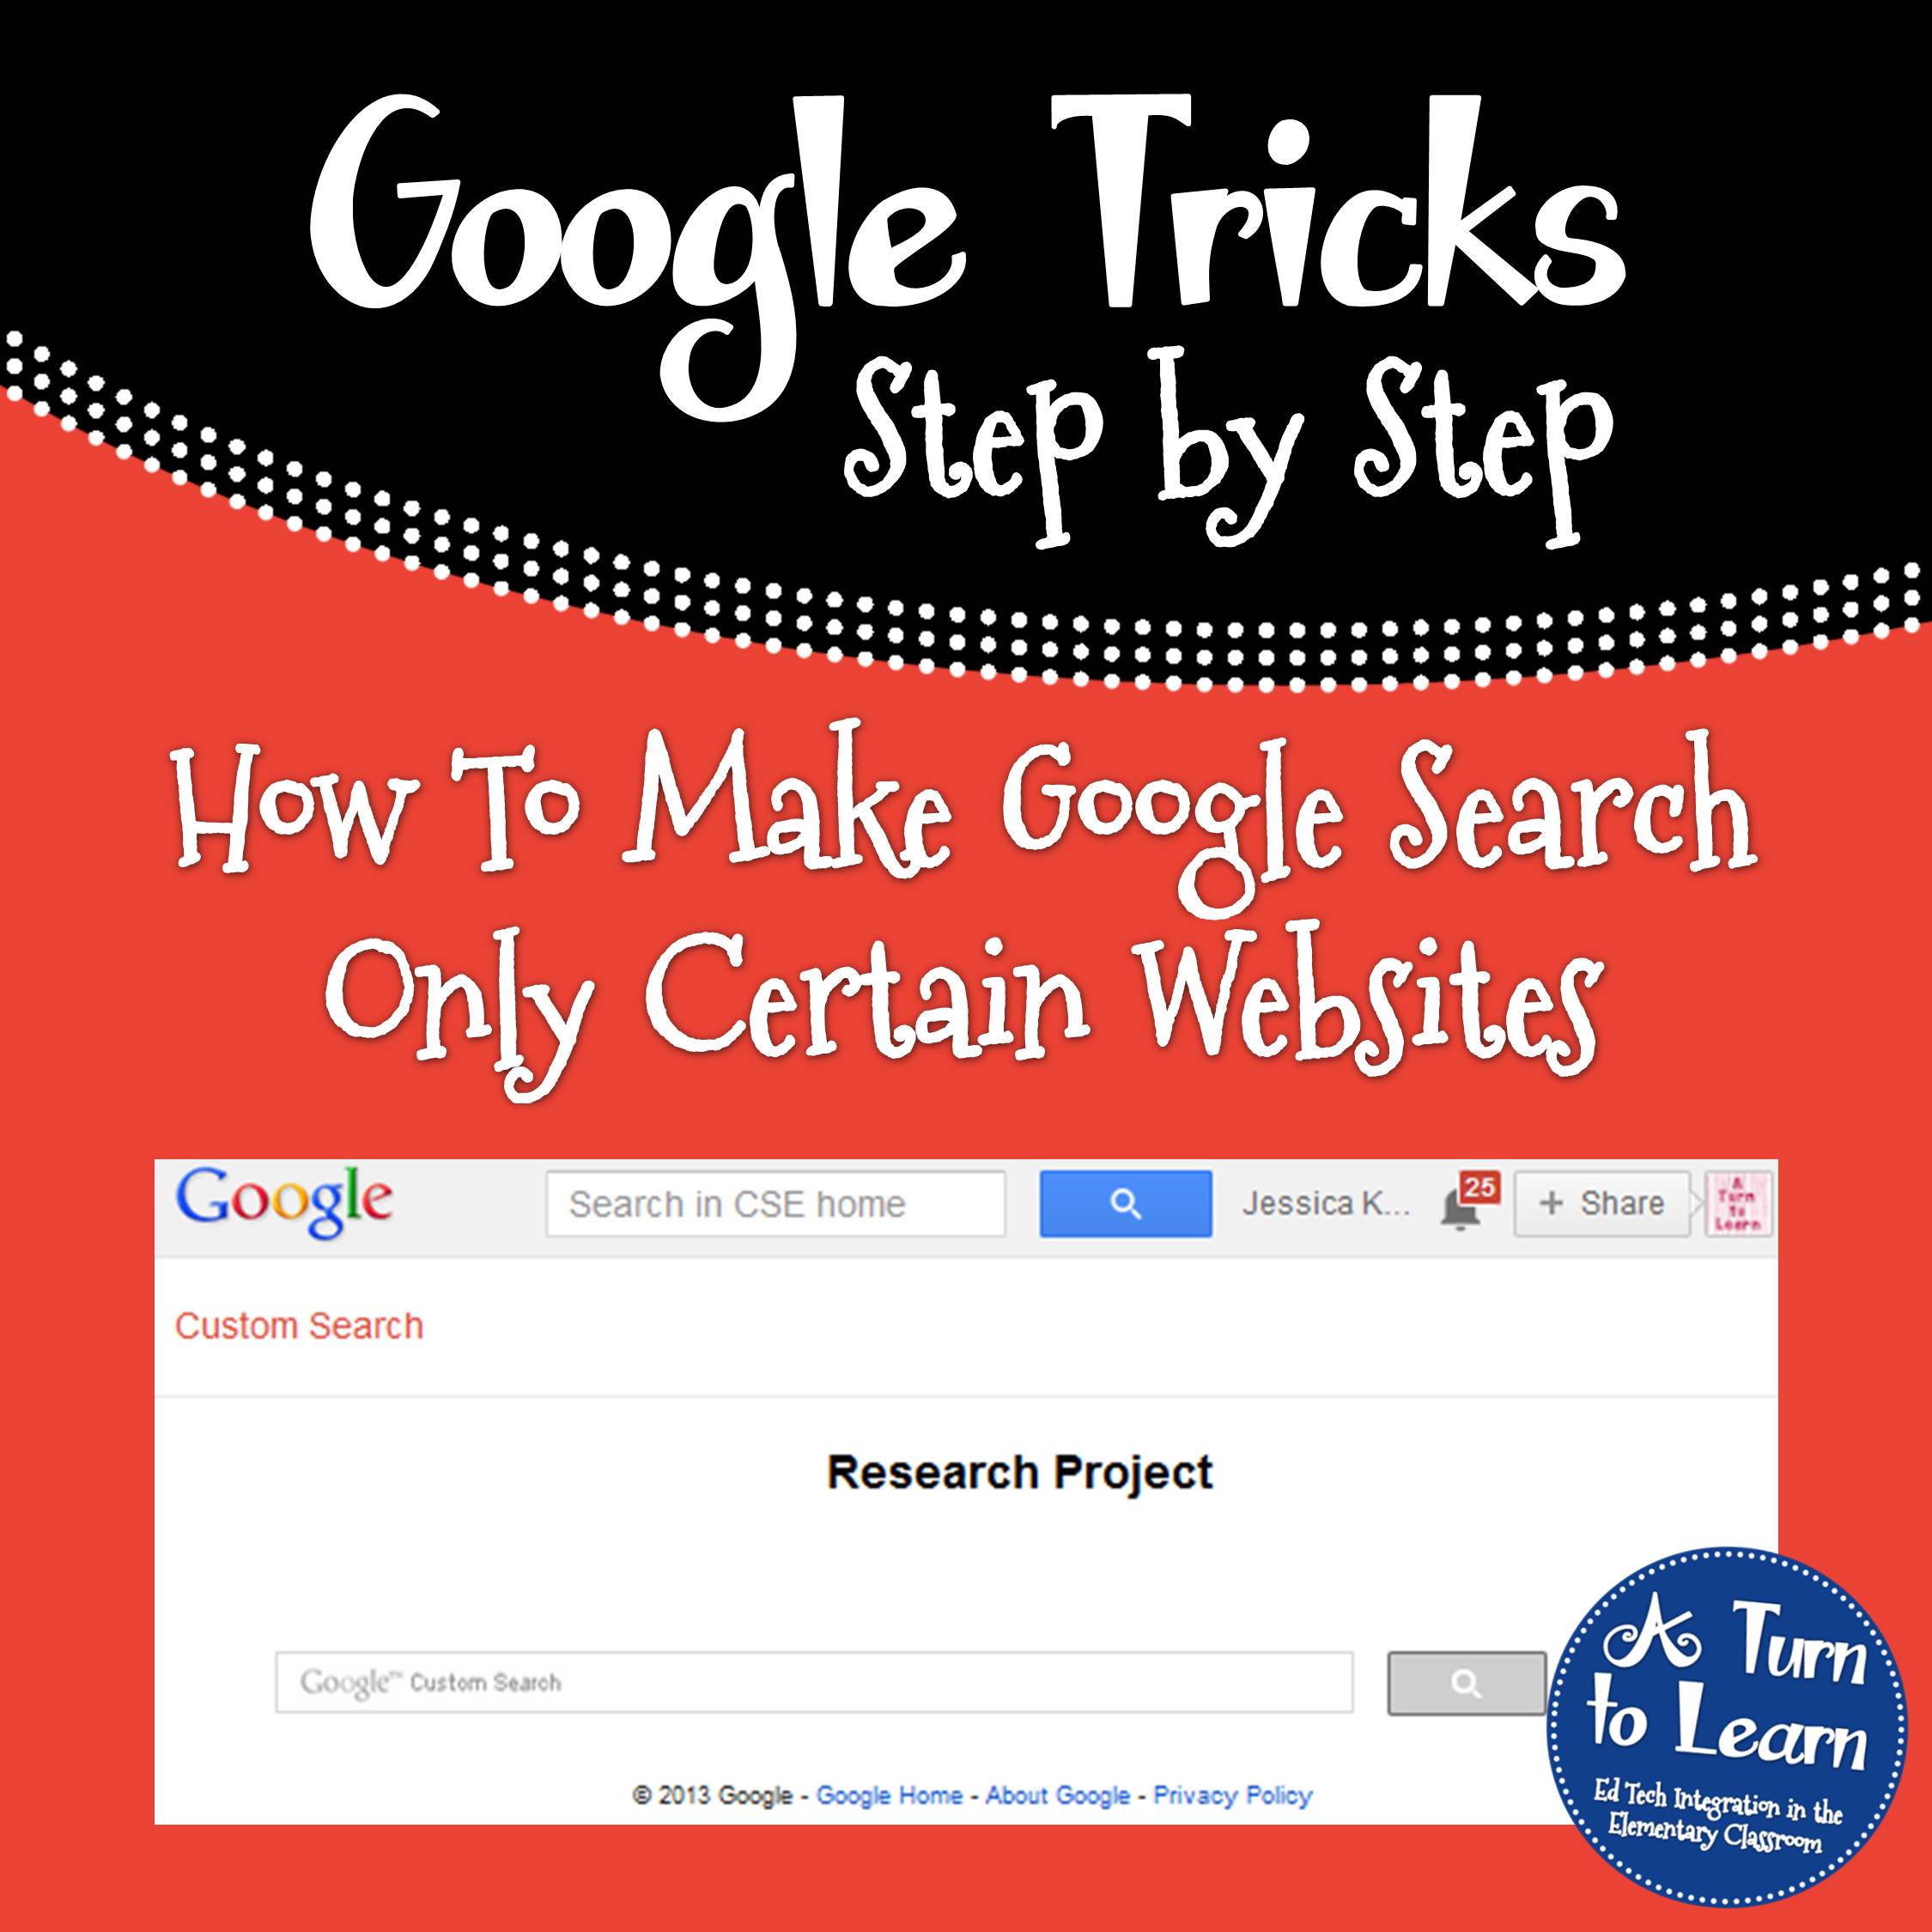 How to Make Google Search Only Certain Websites